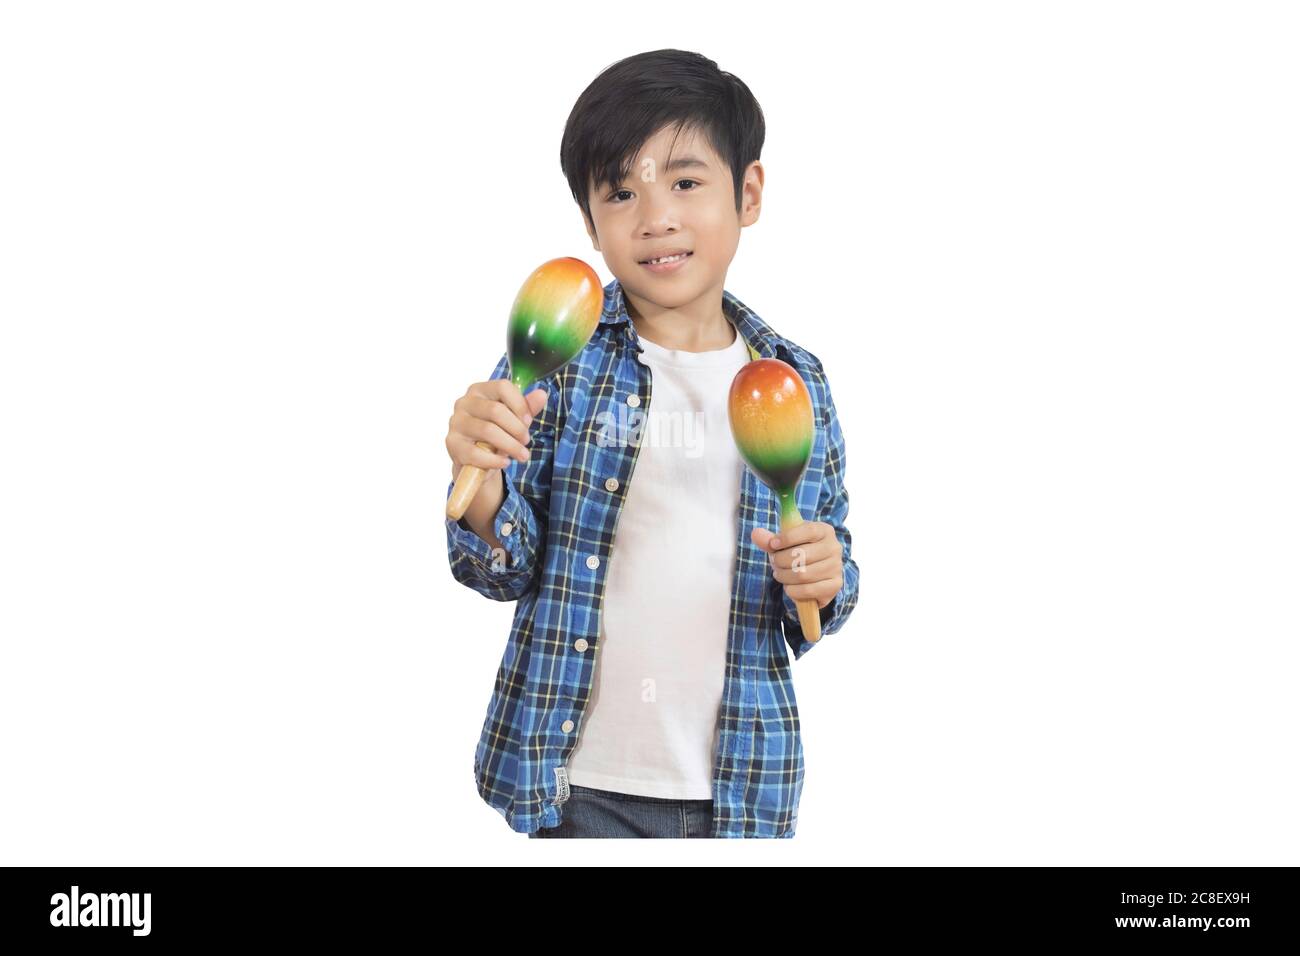 Portrait of a cute Asian elementary school boy wearing a jeans and a plaid shirt with maracus, a musical instrument that shakes to make sounds. An iso Stock Photo